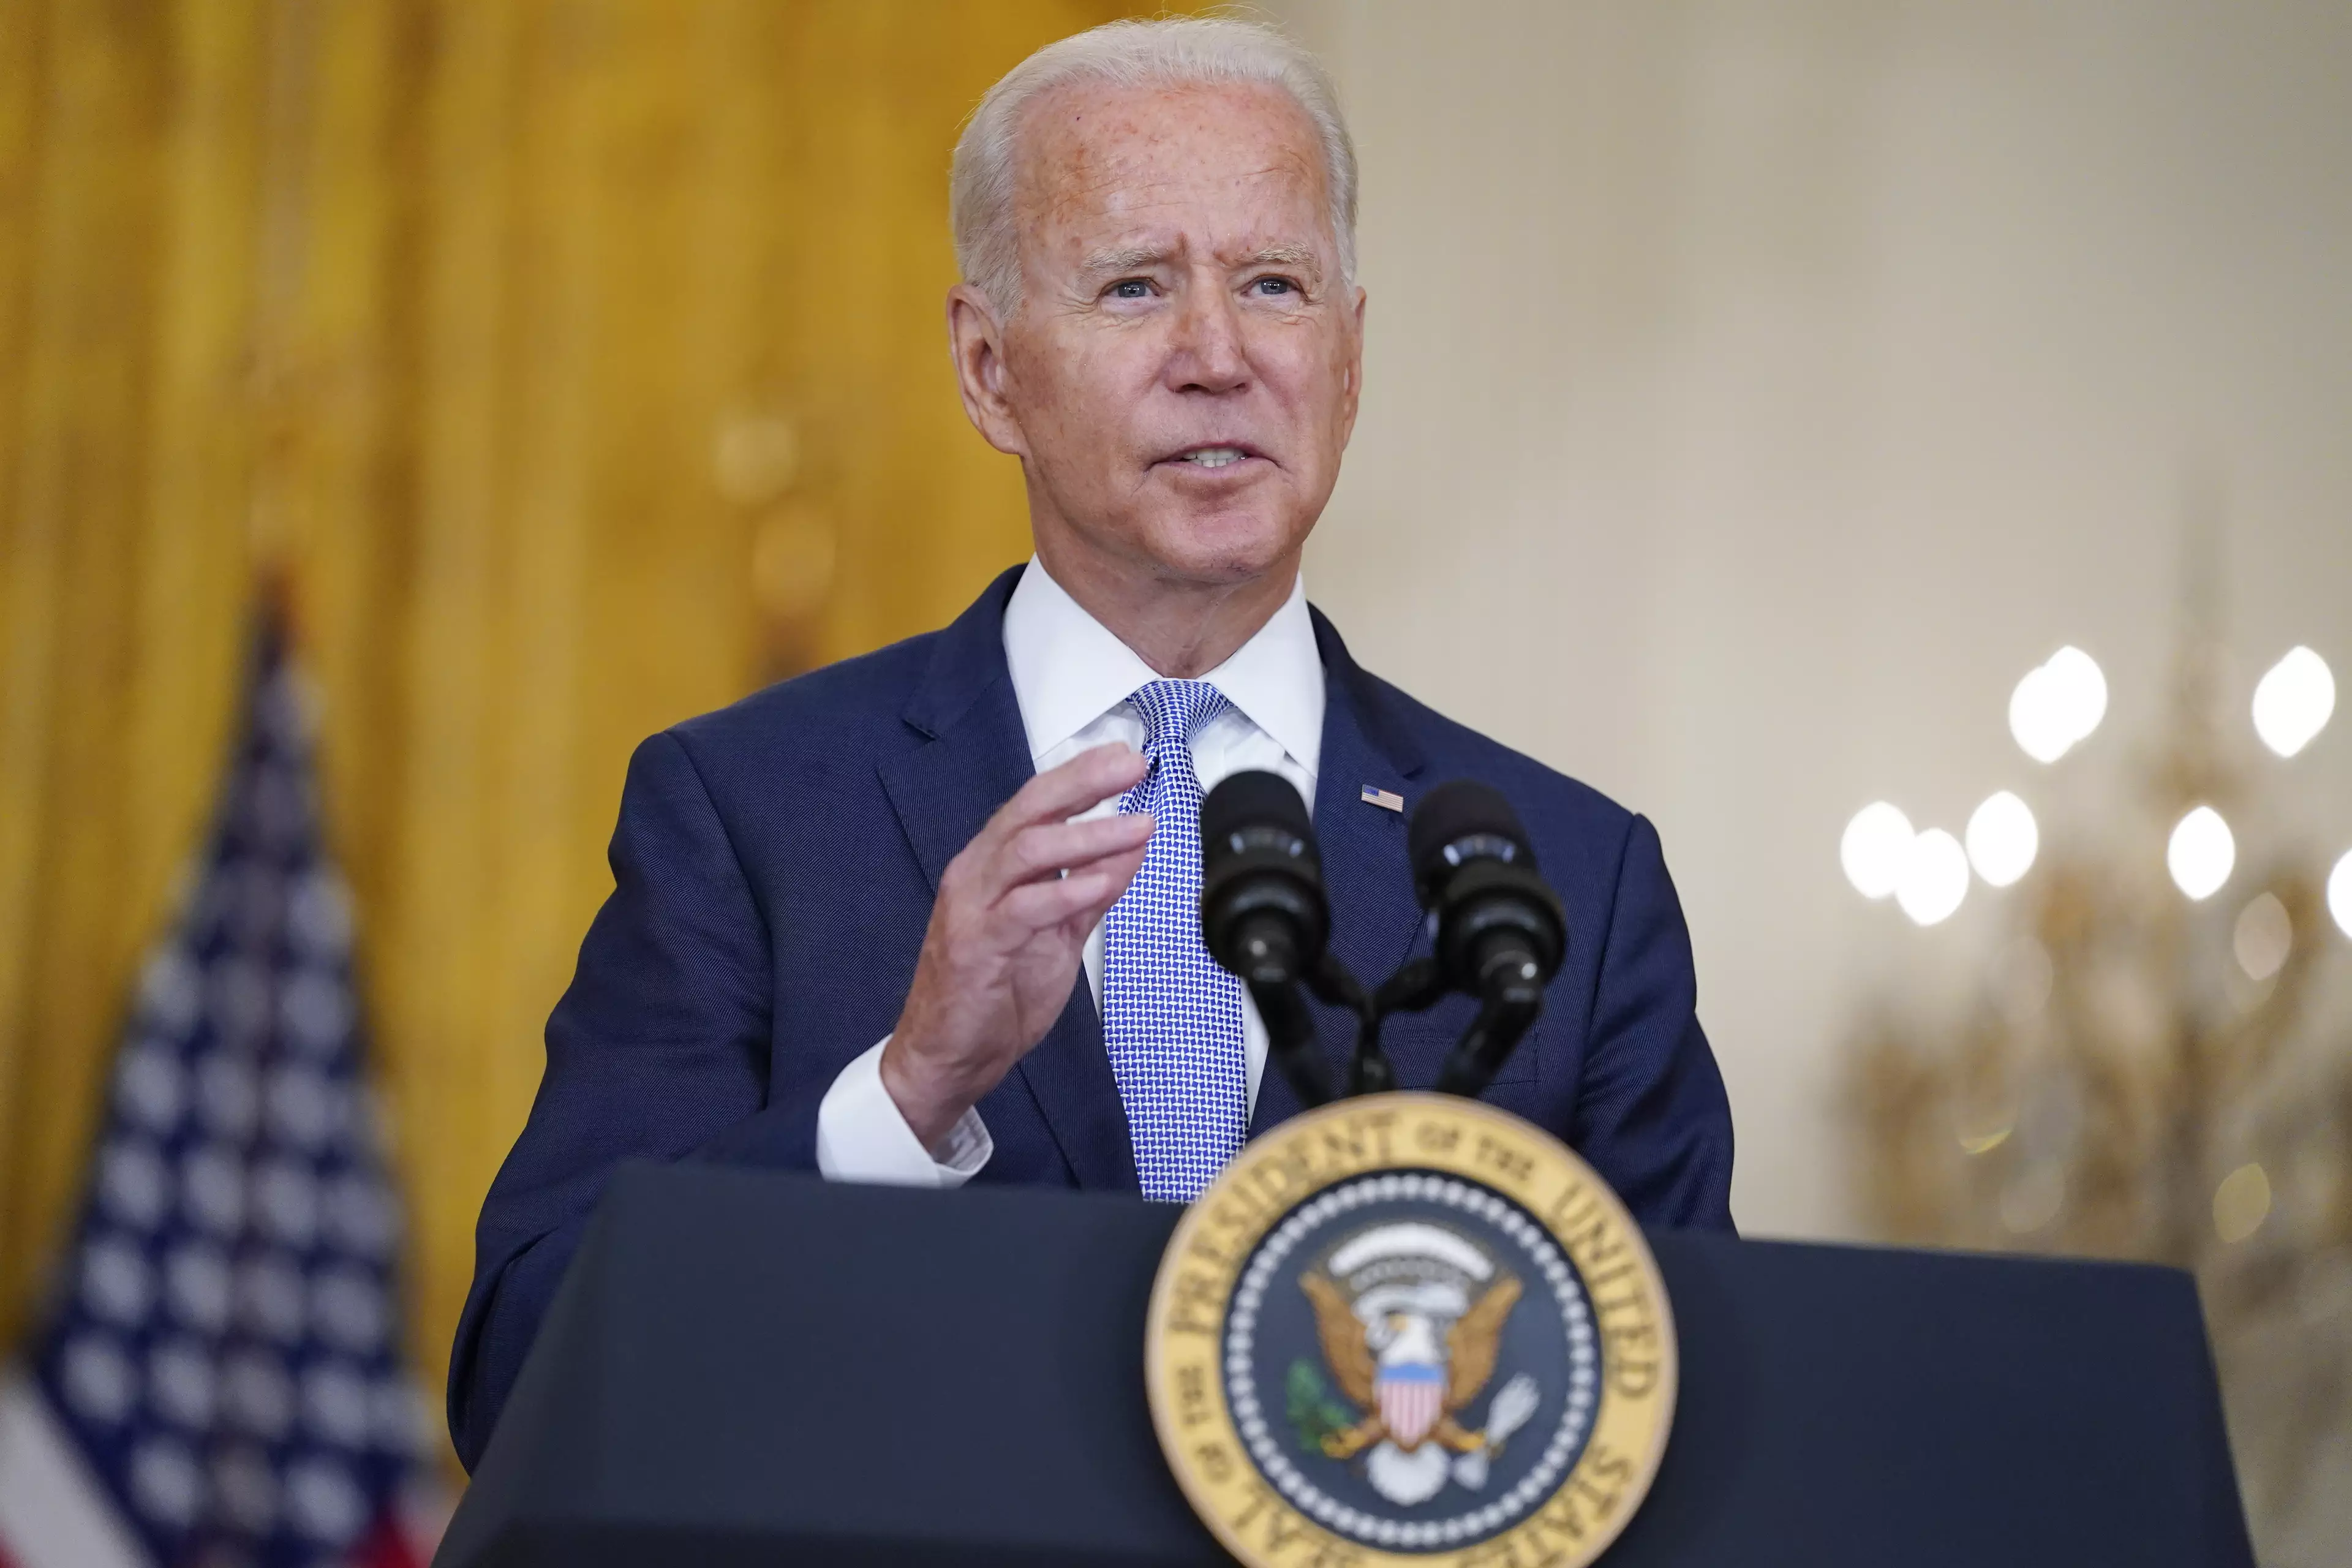 President Biden has been criticised for the US departure.